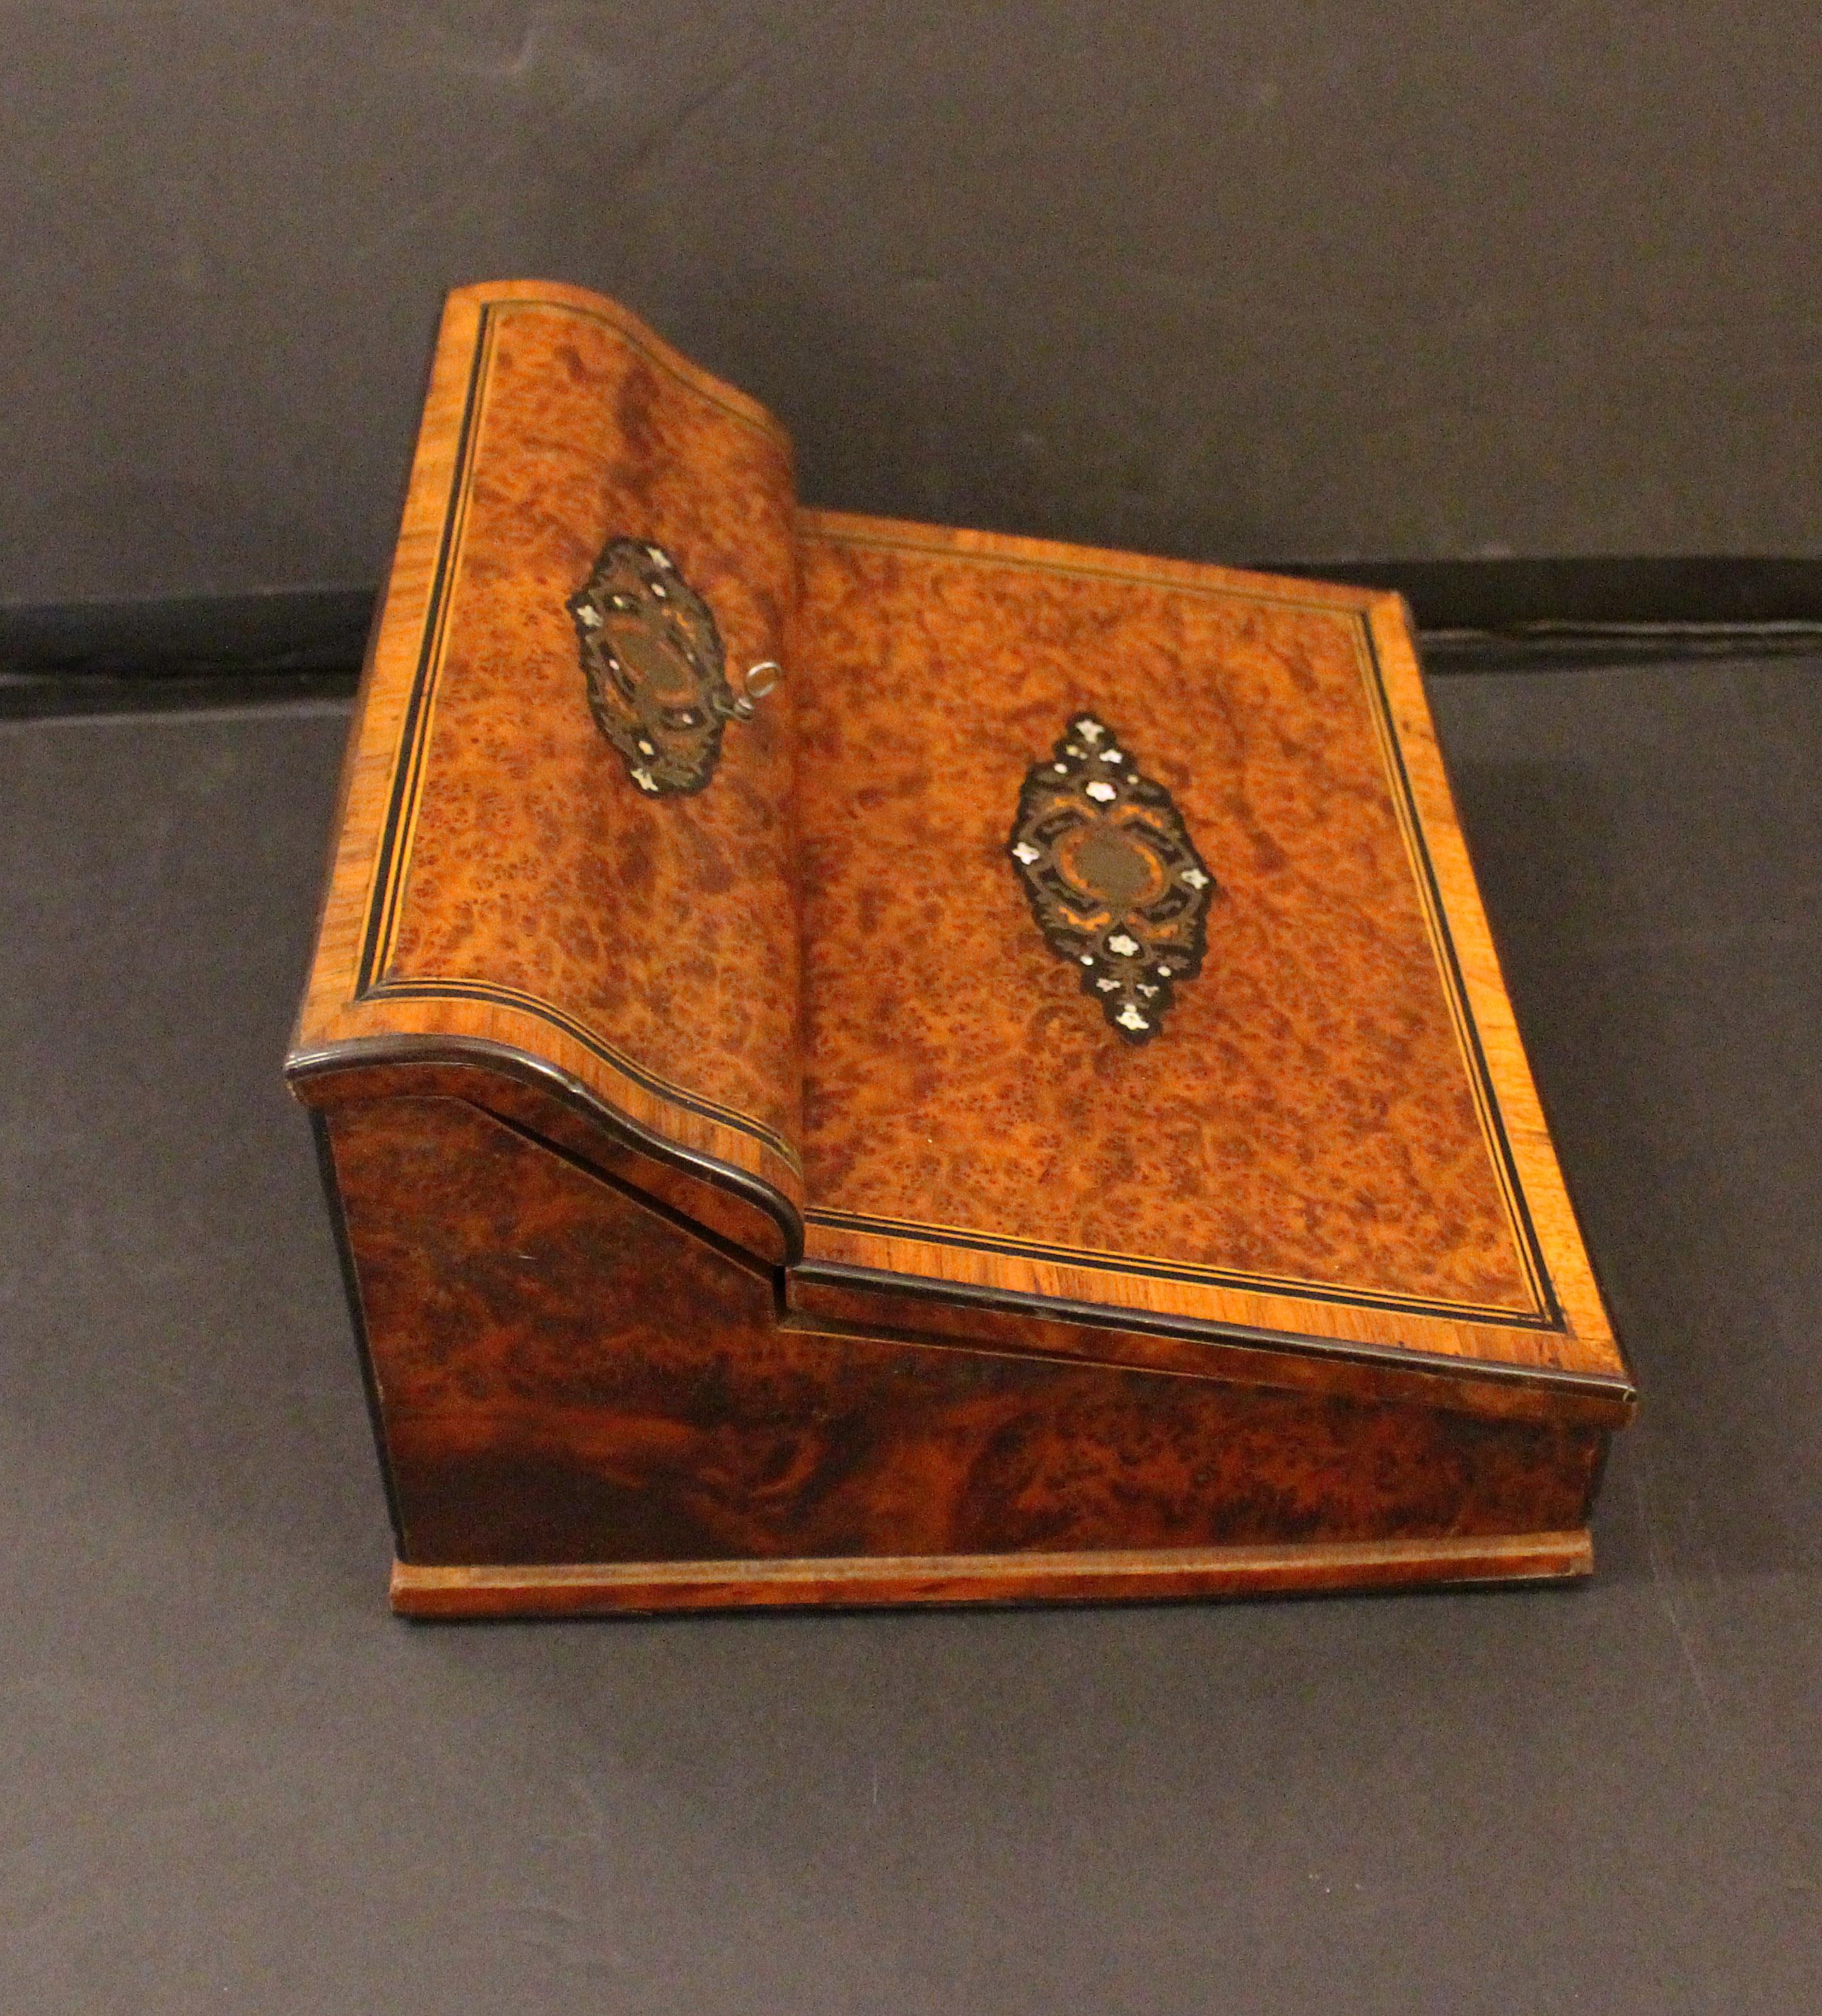 French, circa 1865, Napoleon III table top writing desk box. Burl amboyna, ebony & boulle inlays. Opens to undulating divided stationary compartment & writing surface of blue cut velvet (as found) and large well & pen tray. Brass hardware with